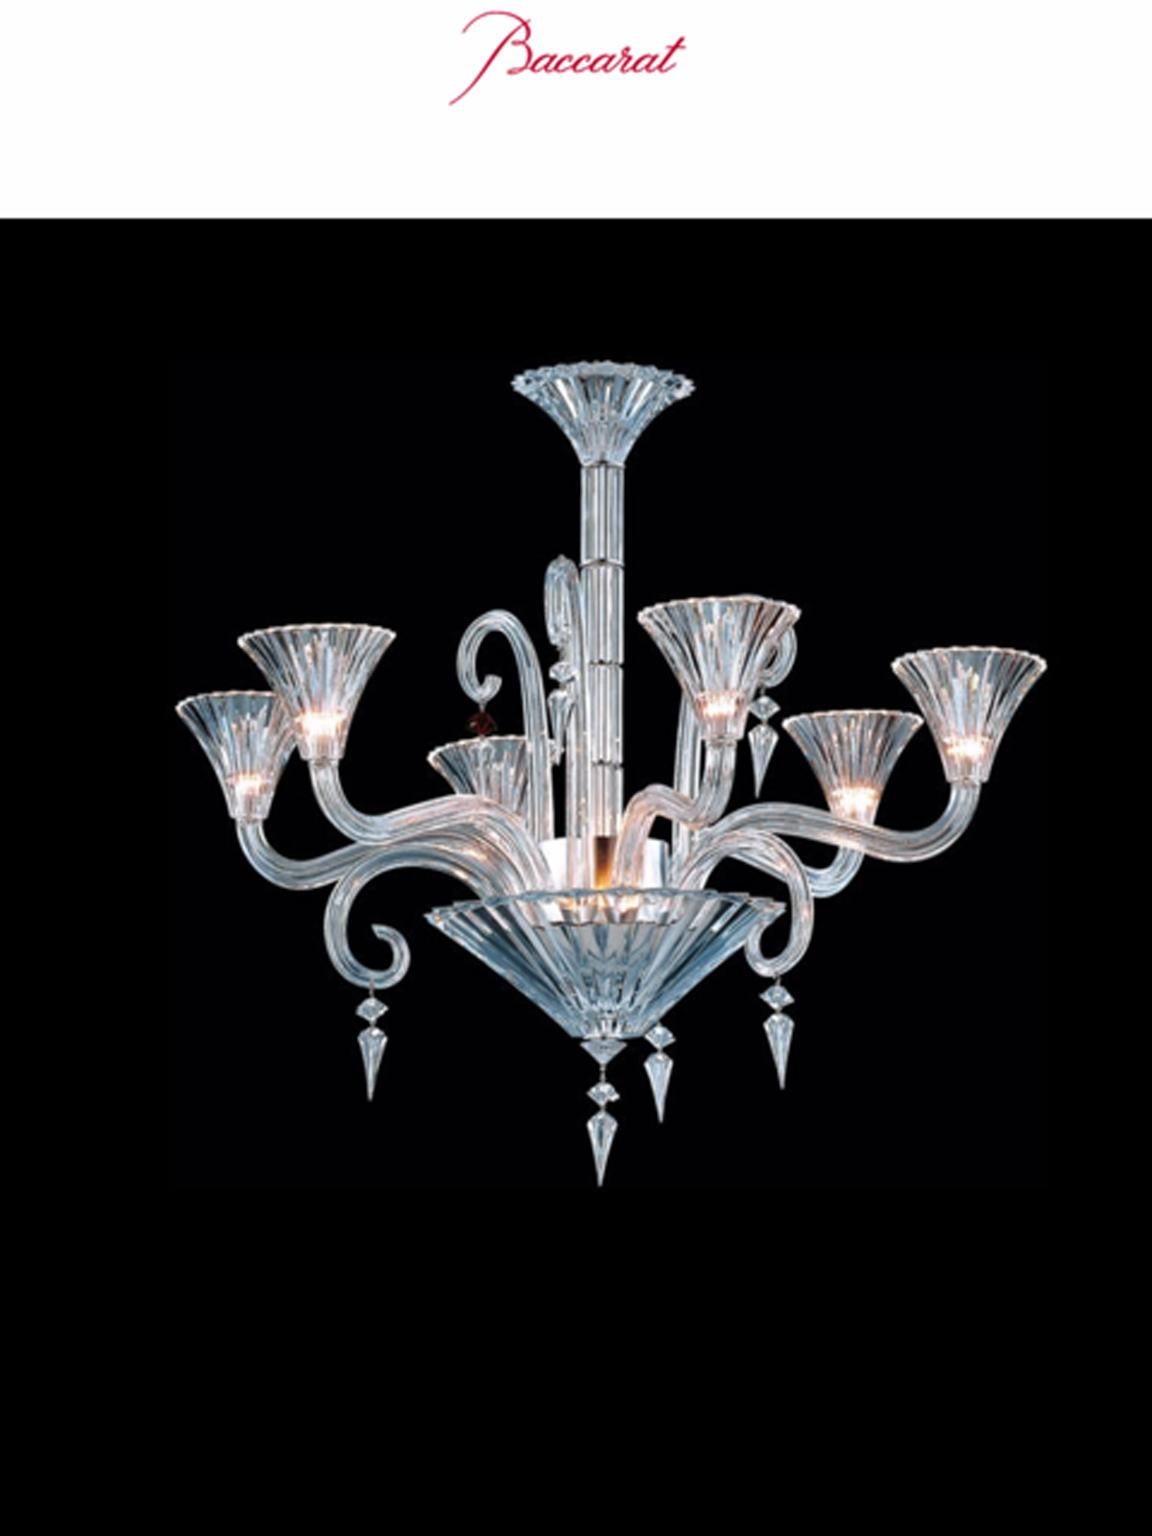 Wonderfully cut crystal emphasizes the diffusion of light and the glitter of the Mille Nuits chandelier. True to the Baccarat tradition, this sumptuous chandelier blends in perfectly with every sophisticated home interior. 
The emblematic Baccarat